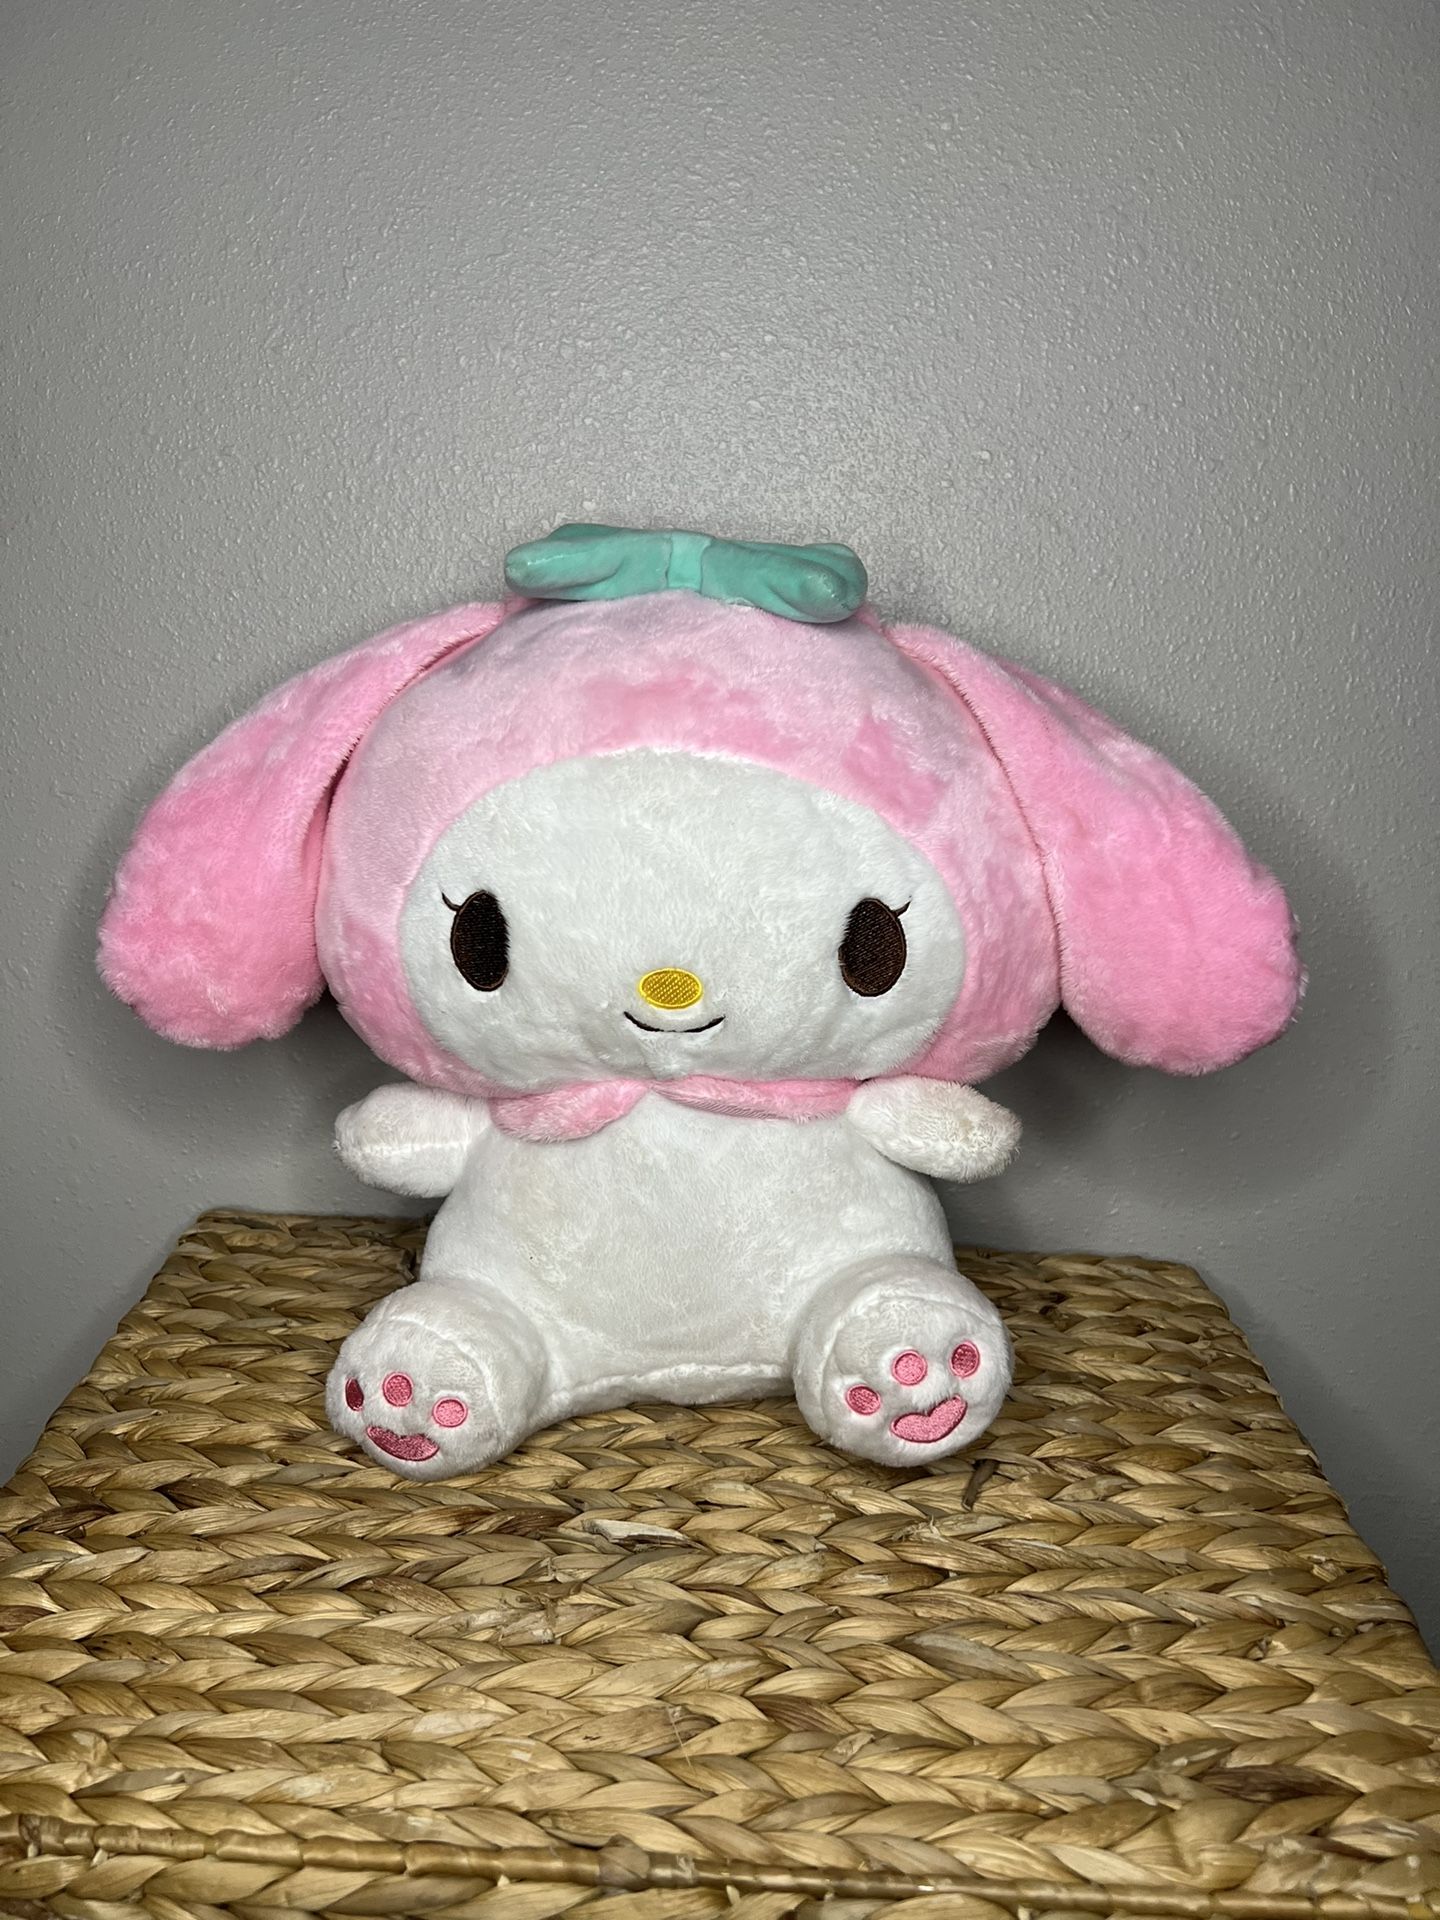 My Melody Plushie/backpack